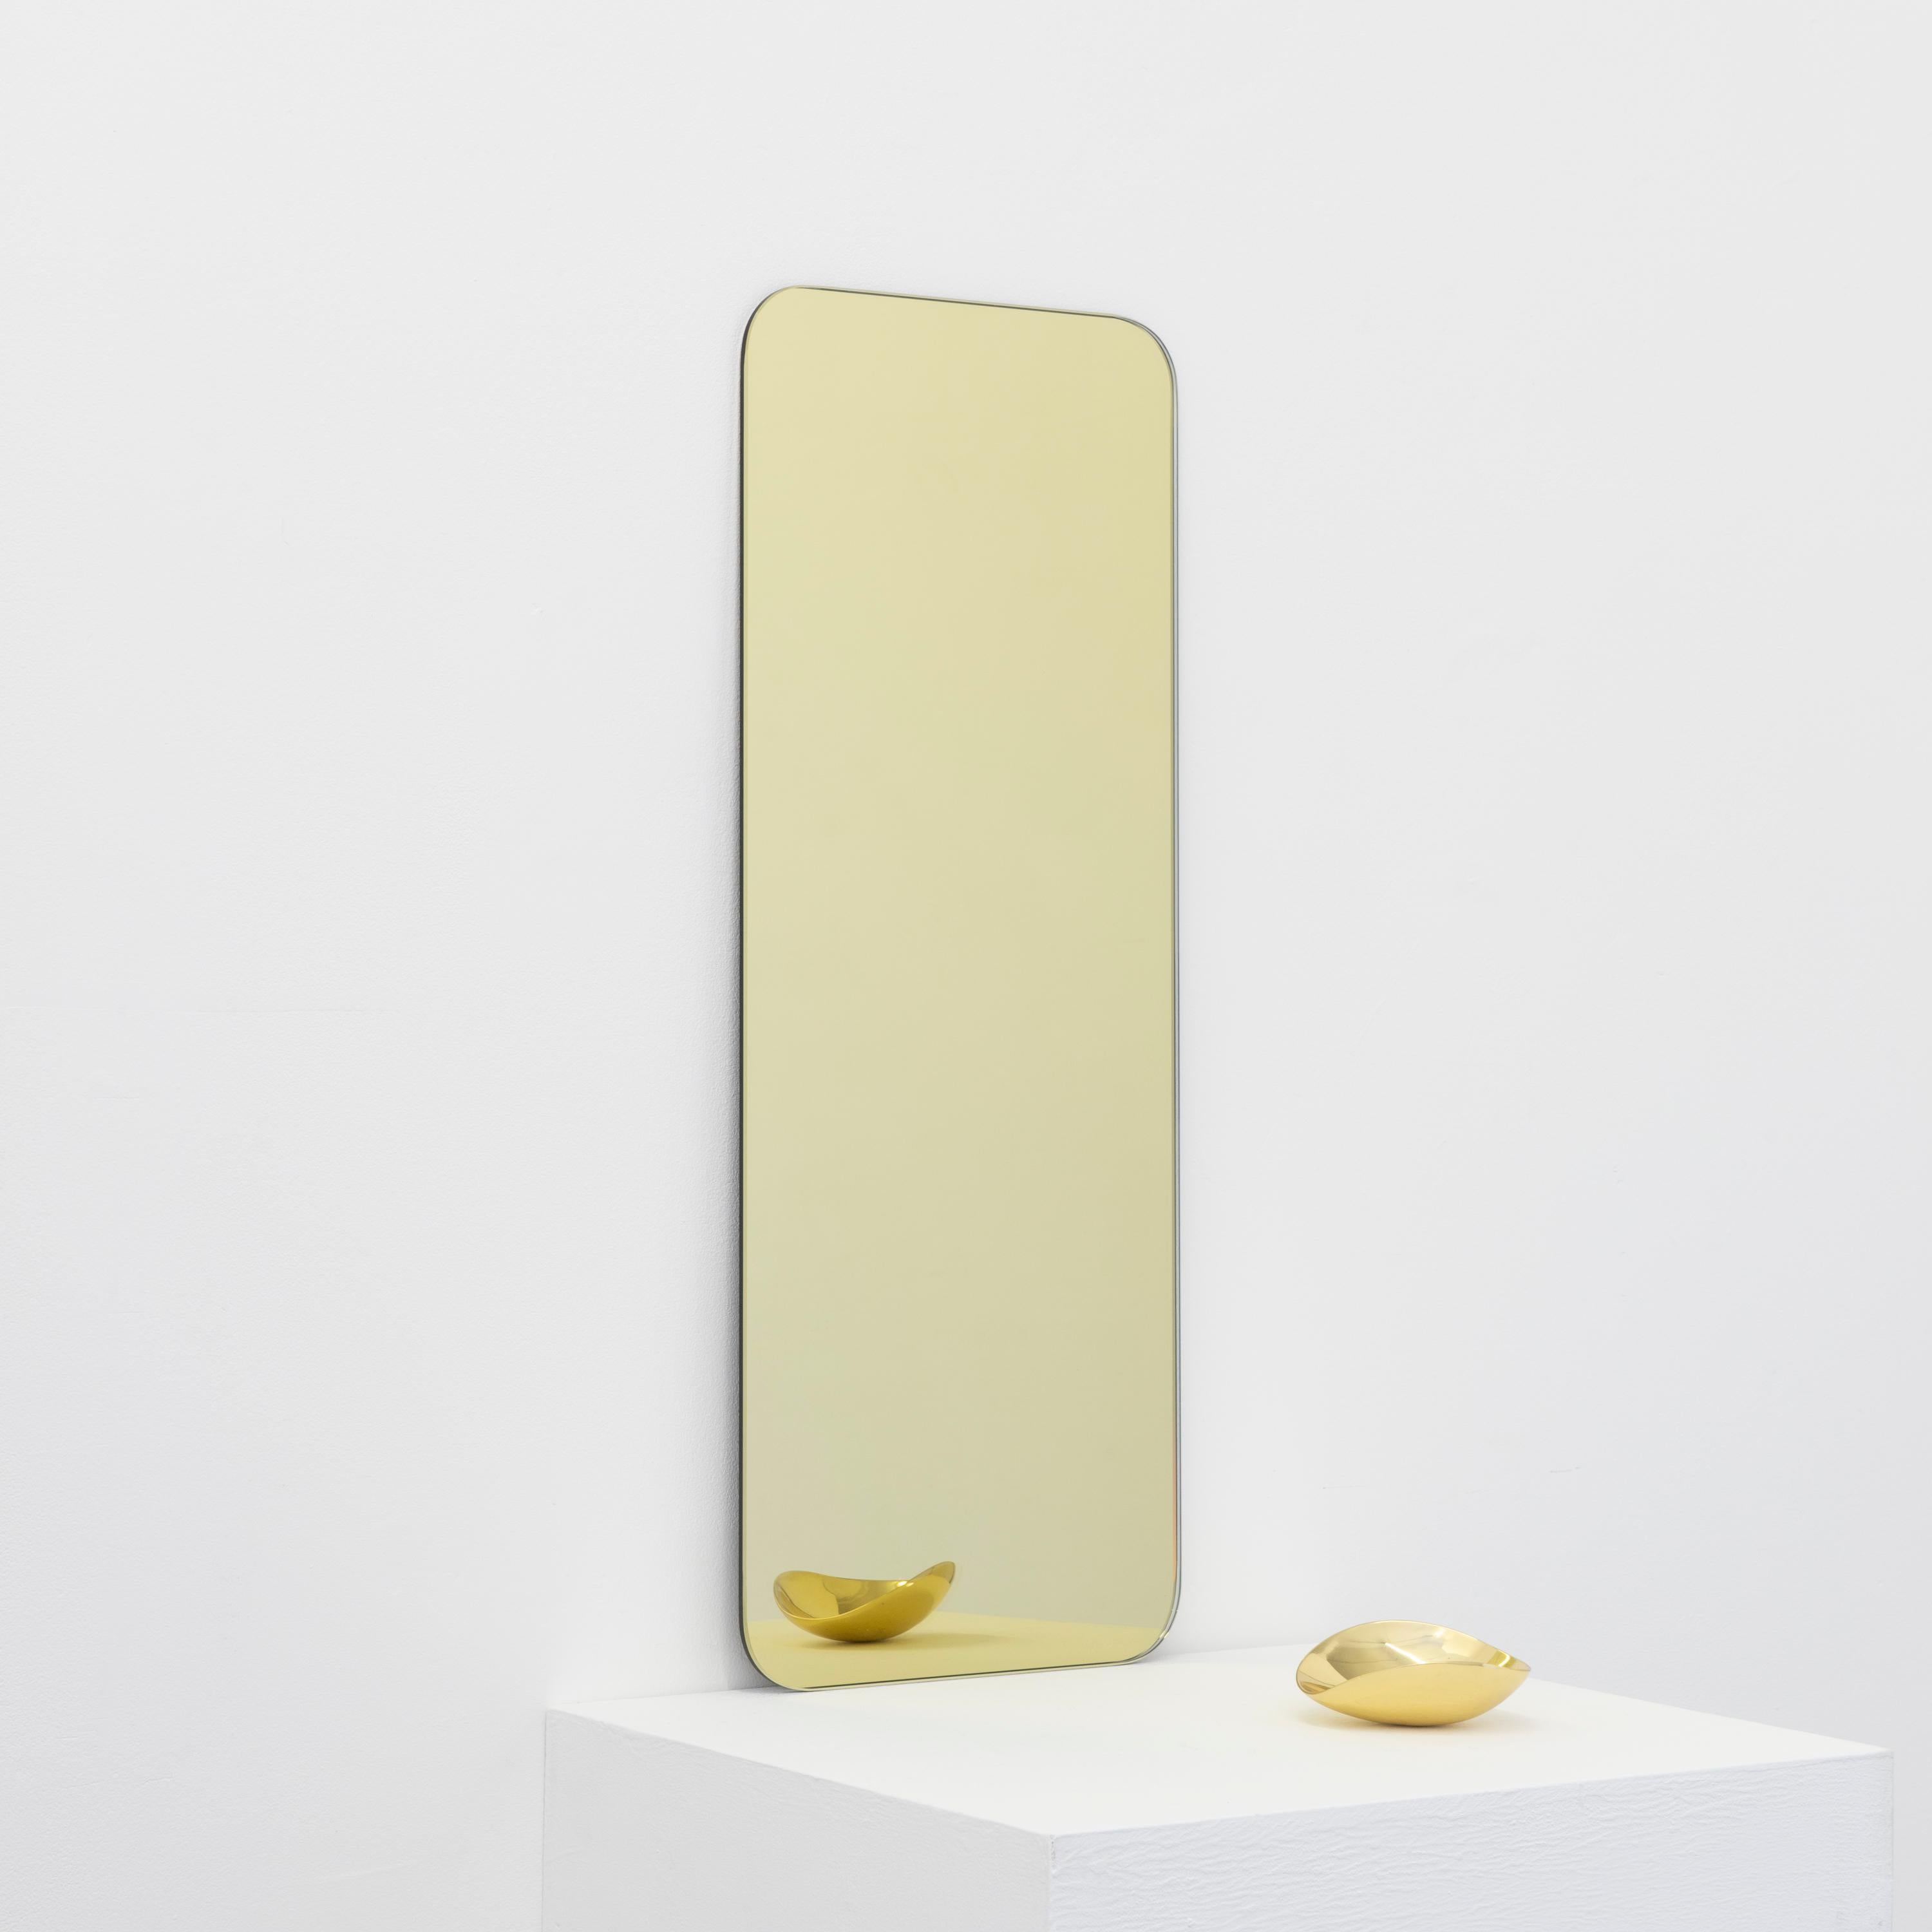 Quadris Gold Rectangular Frameless Contemporary Mirror with Floating Effect, XL In New Condition For Sale In London, GB